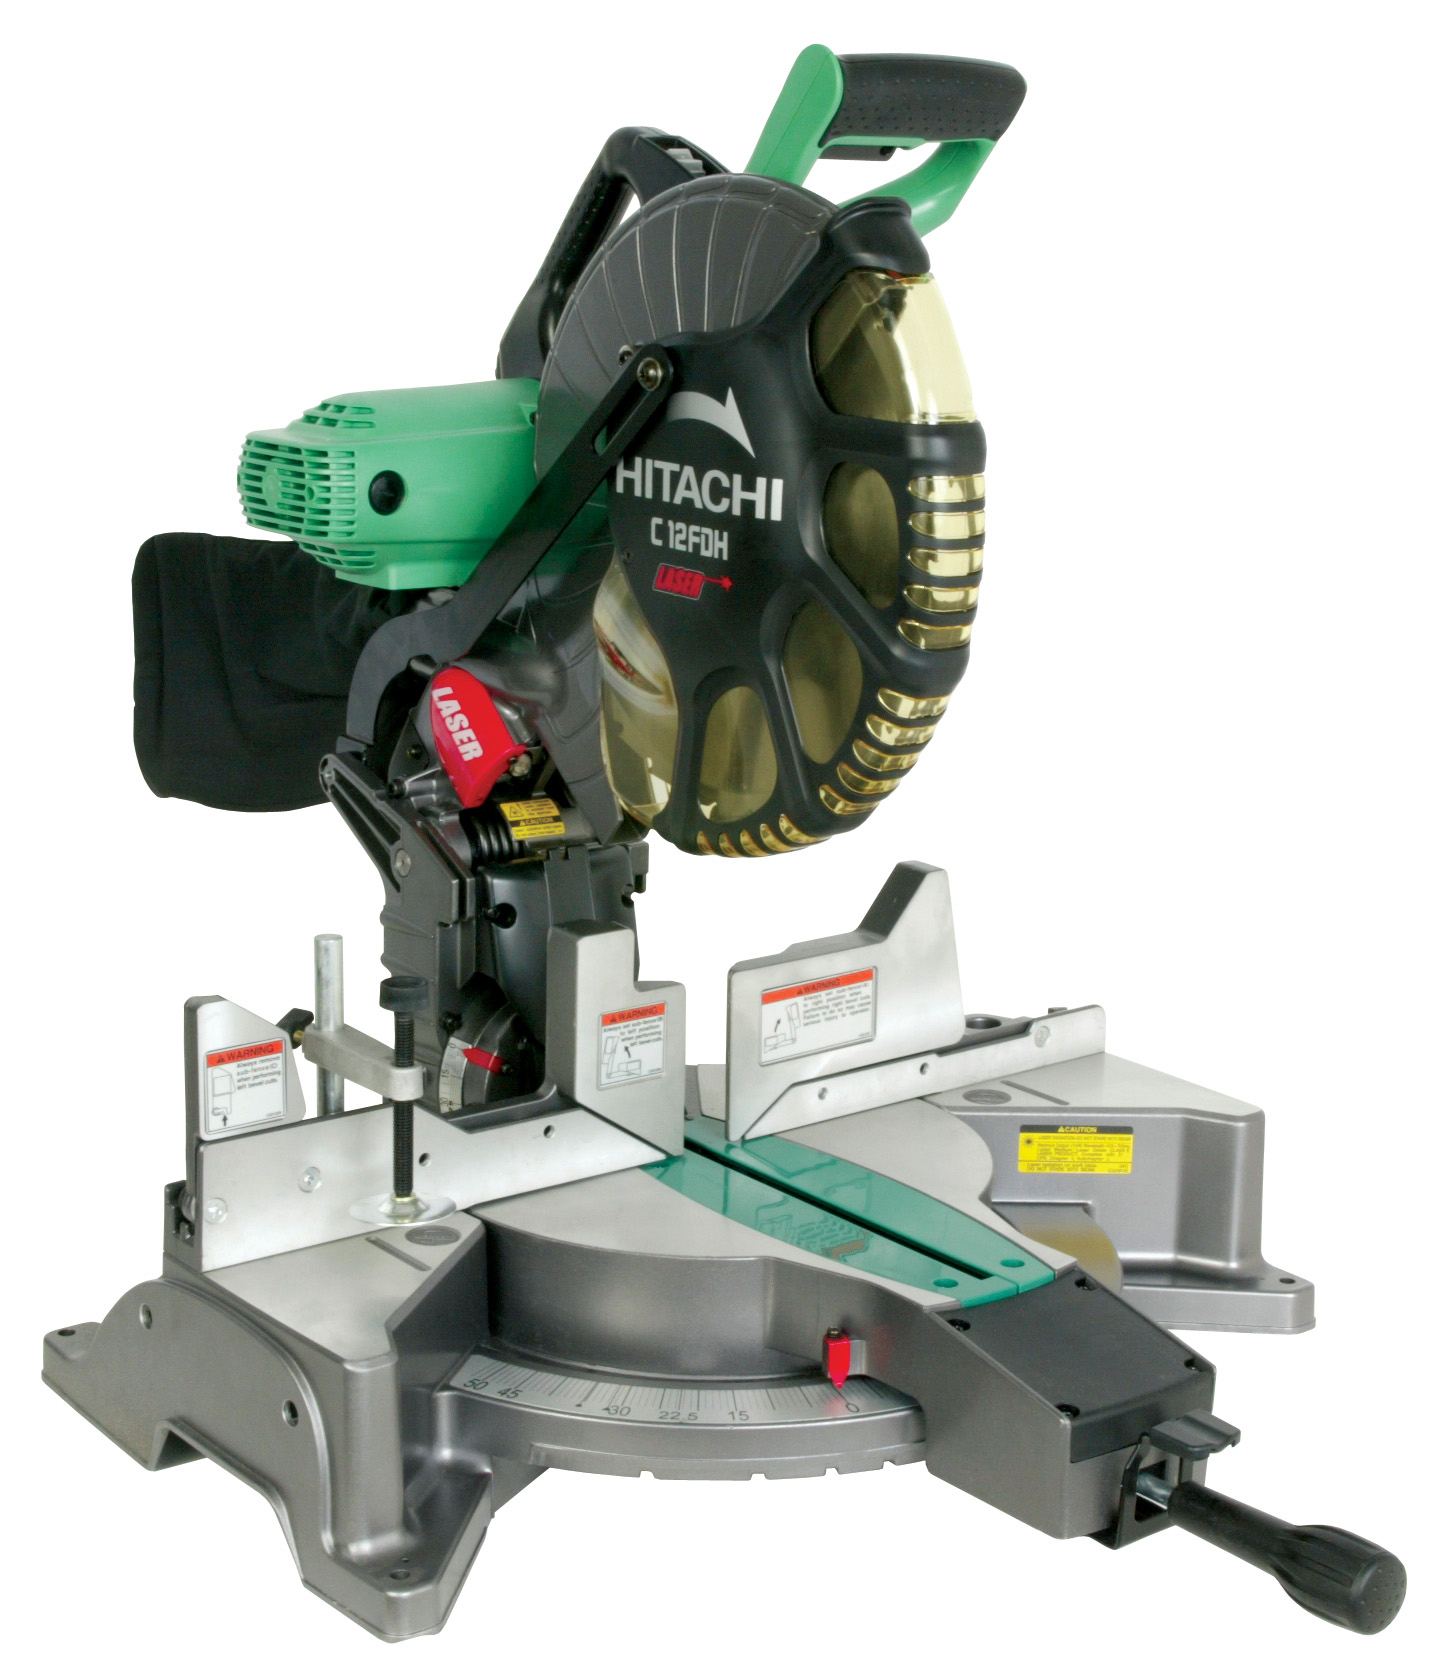 Hitachi C12Fdh 12-Inch Dual Compound Miter Saw With Laser Marker - image 1 of 6